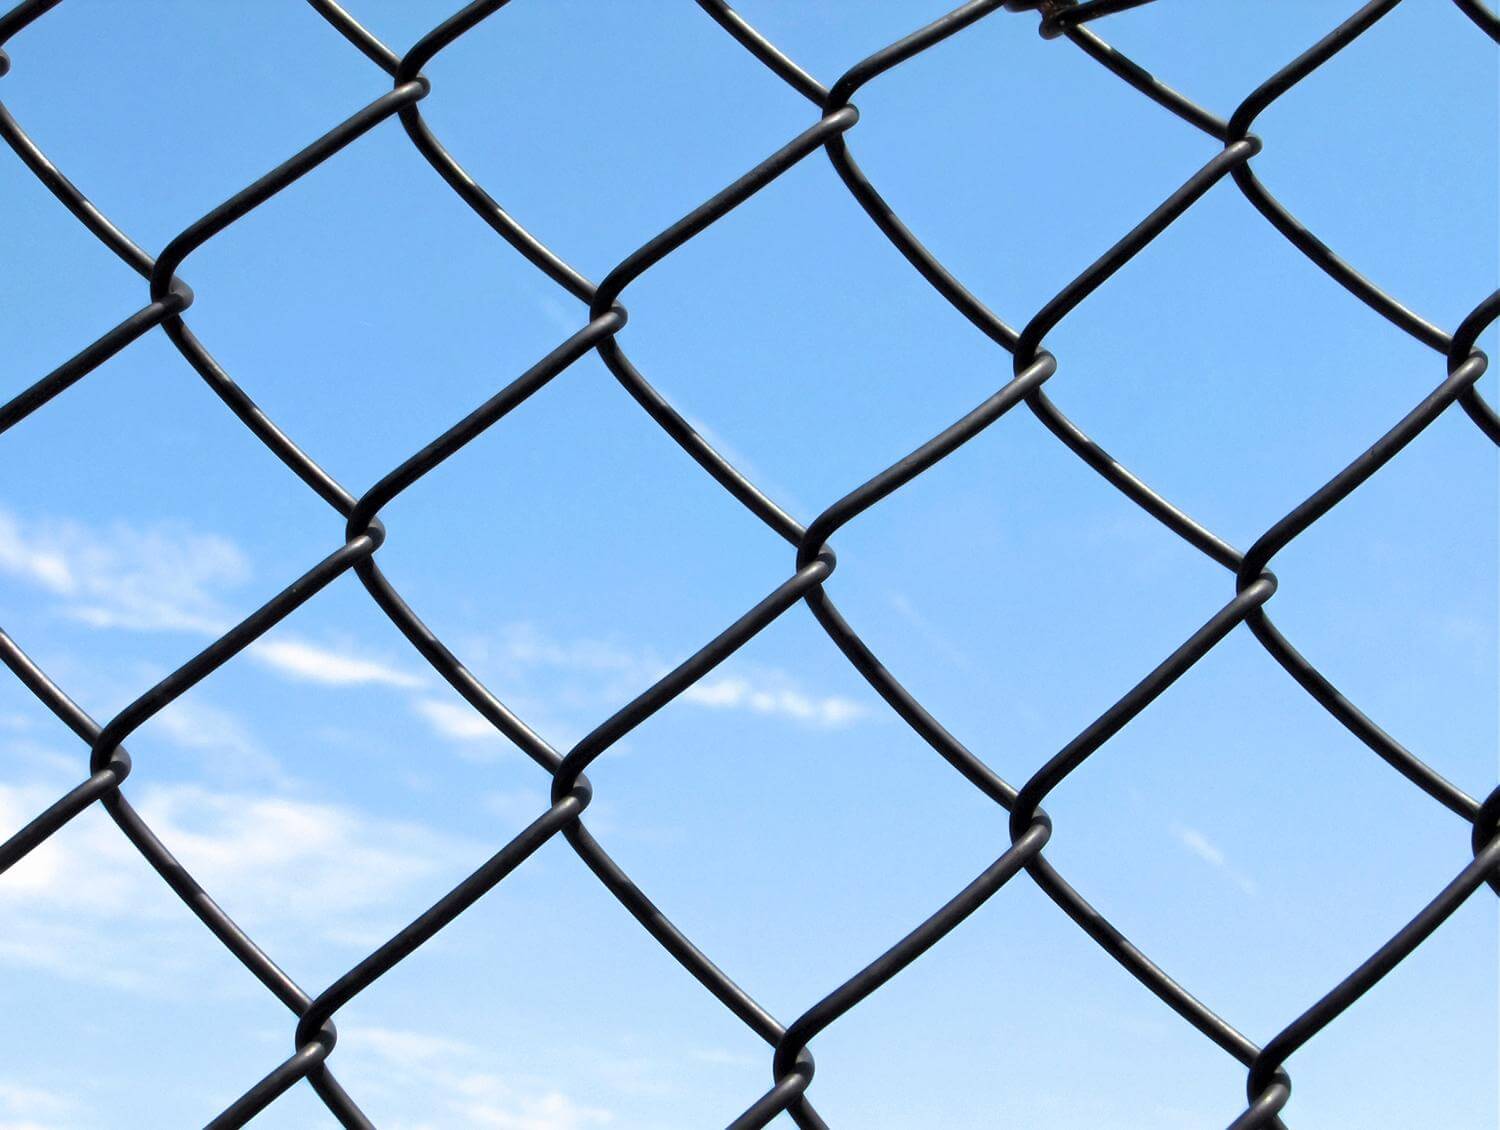 Industrial Fence: Meet the Demands of High-Security Areas